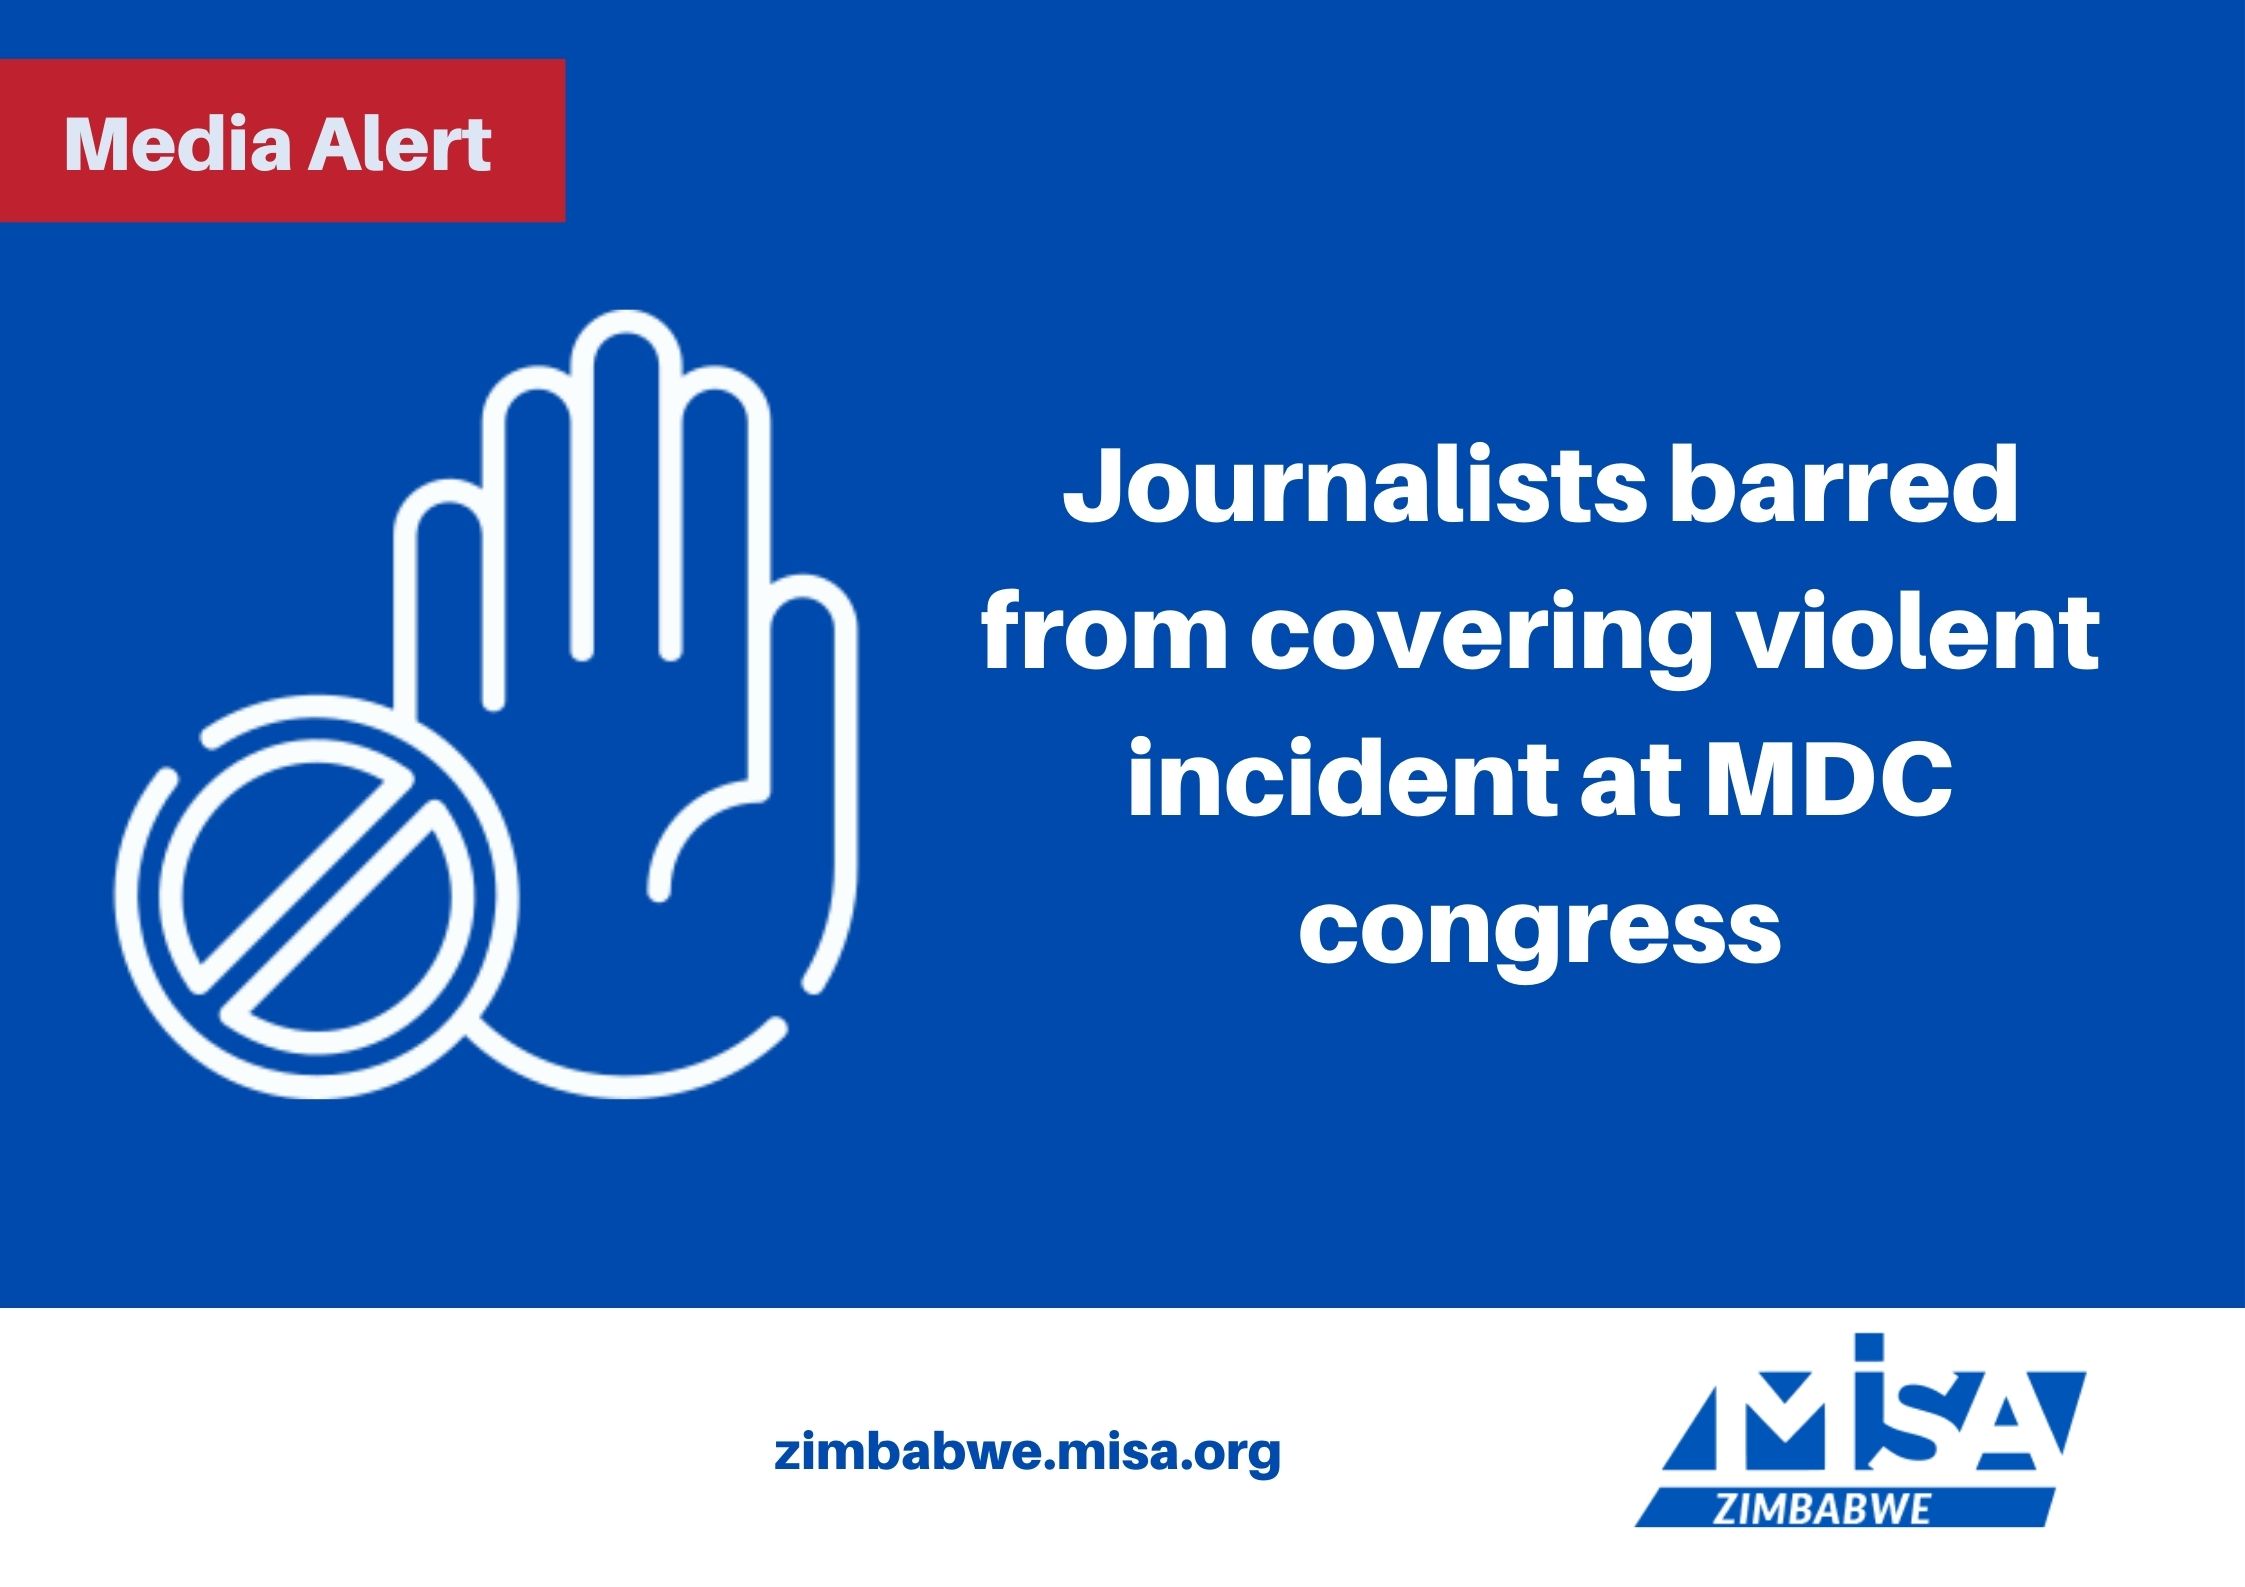 Journalists barred from covering violent incident at MDC congress